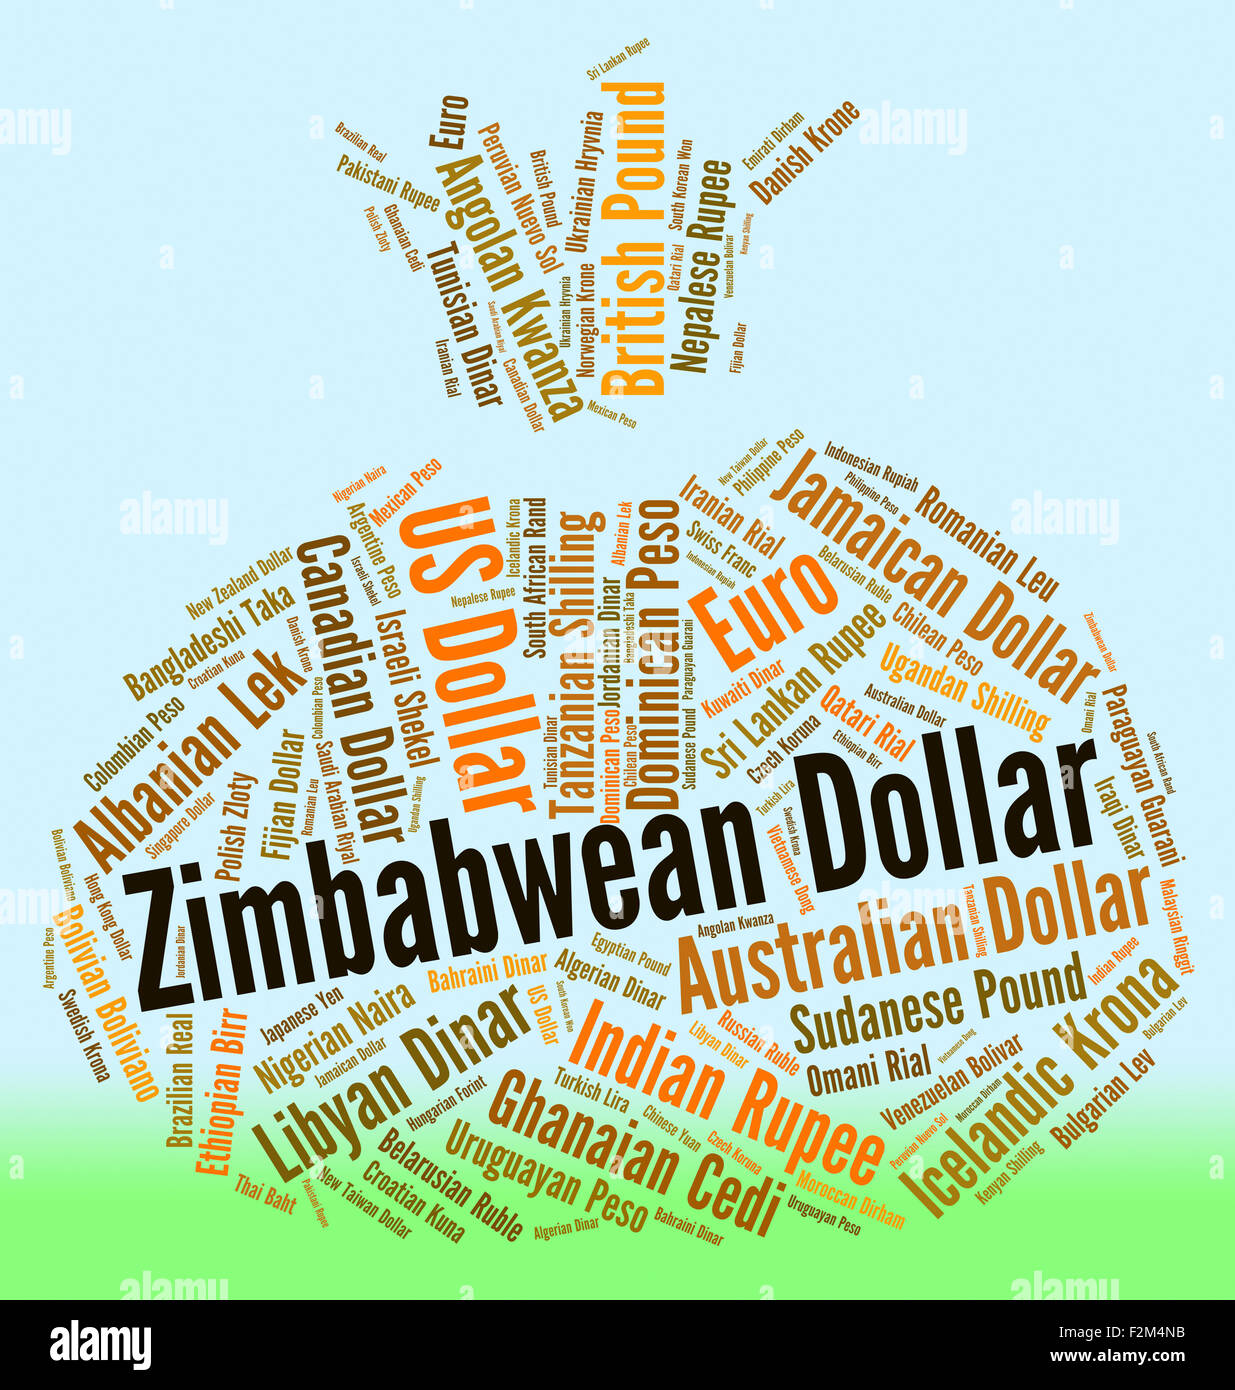 Zimbabwean Dollar Meaning Foreign Currency And Wordcloud Stock Photo